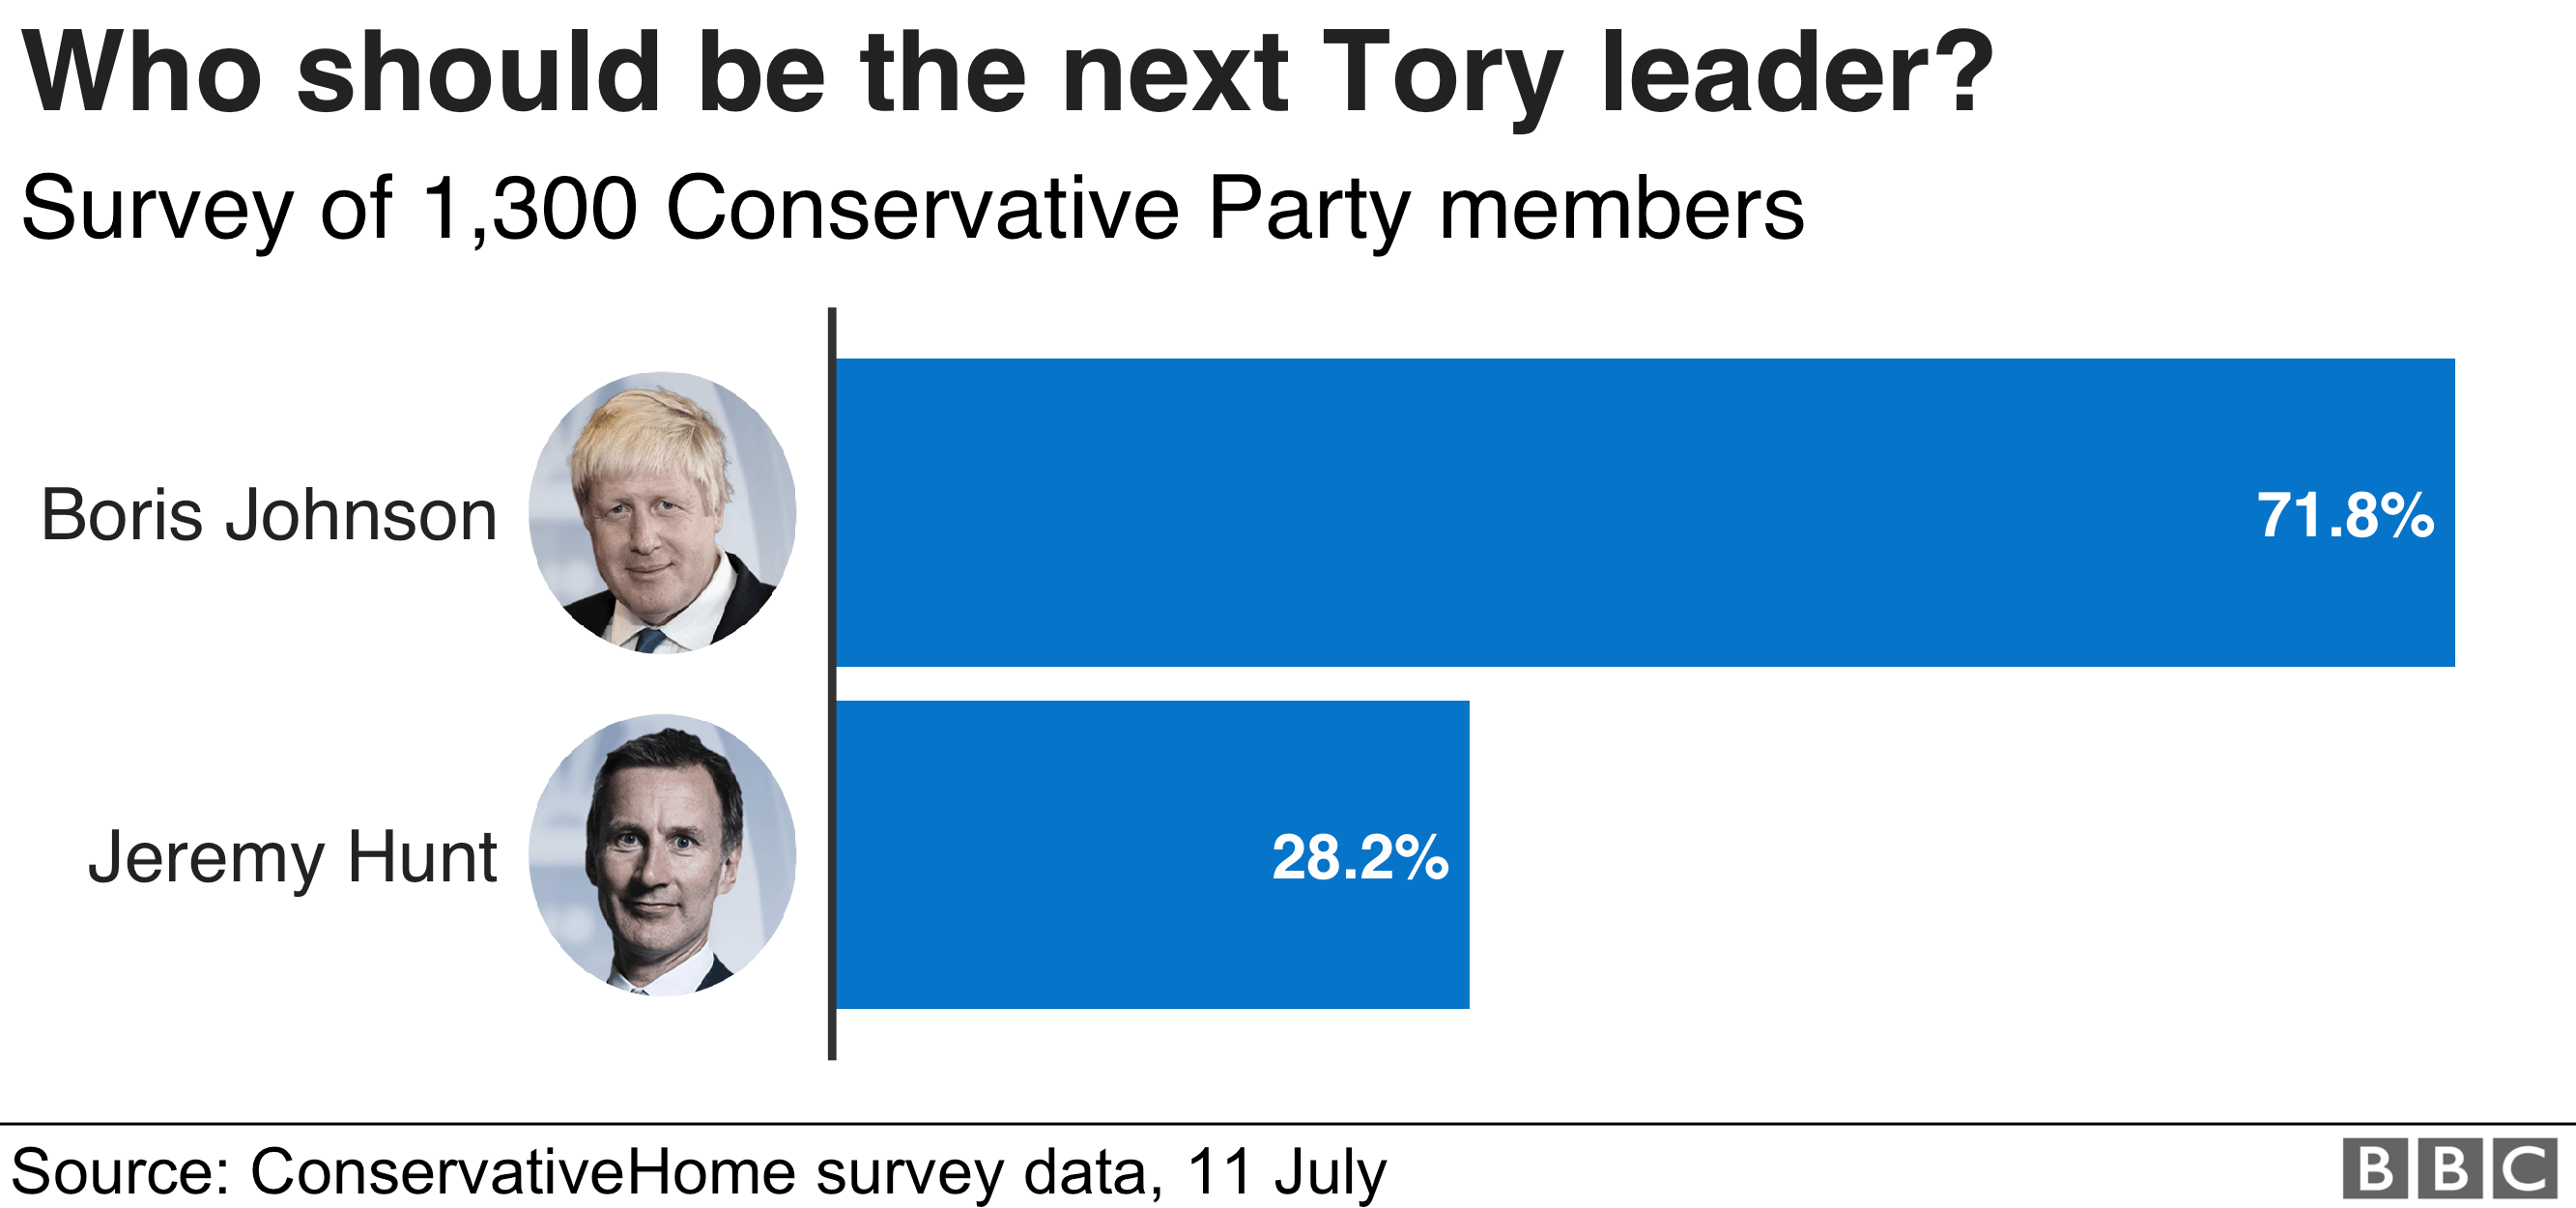 Chart showing the results of a ConservativeHome survey of Tory Party members. Boris Johnson got 71.8% of votes, while Jeremy Hunt got 28.2%